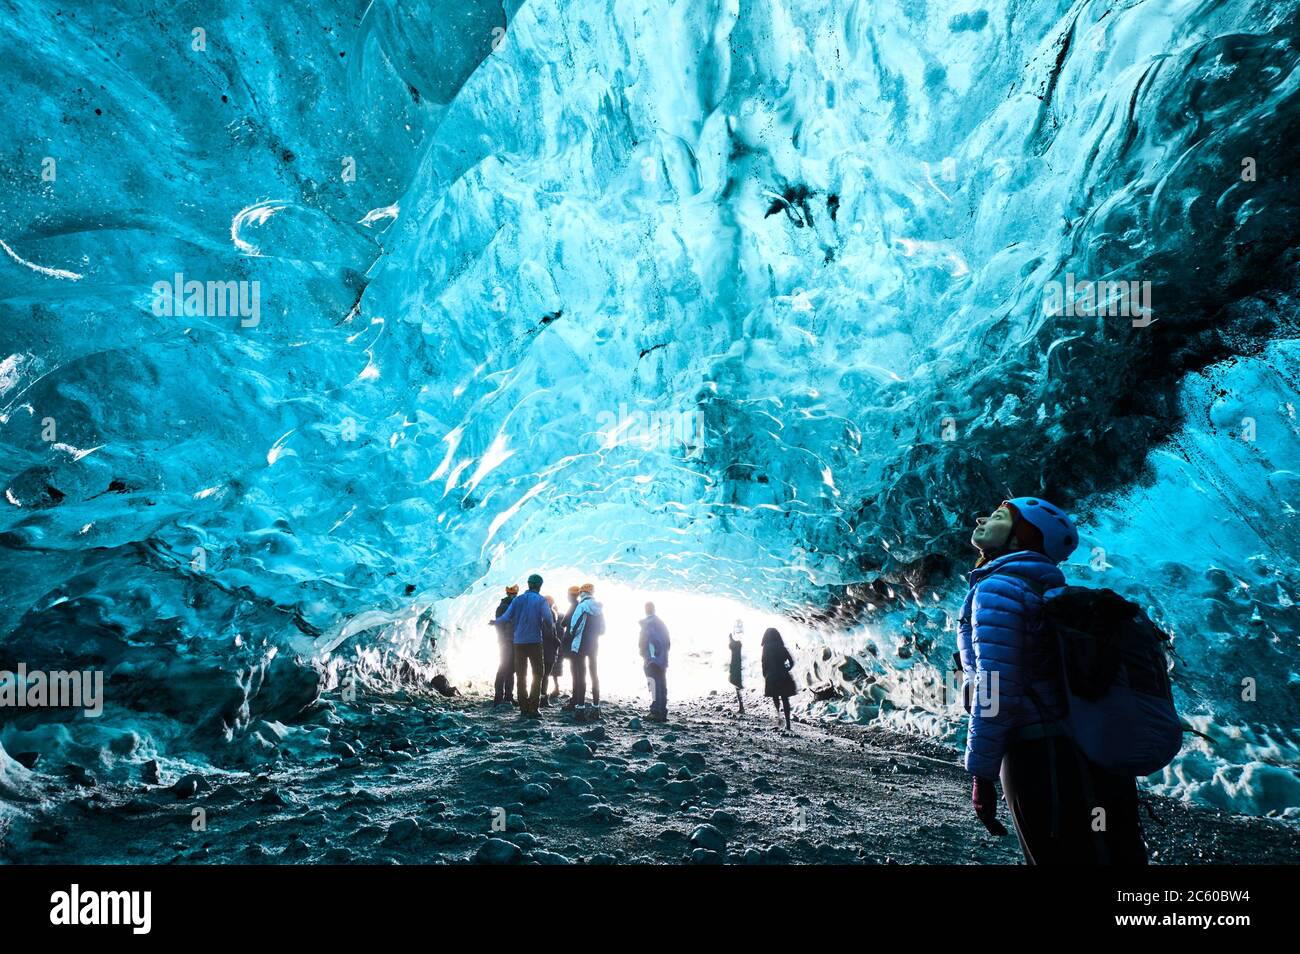 Tourists exploring a ice cave in Breidamerkurjökull glacier, which is an outlet glacier of the larger glacier of Vatnajökull (region of Austurland, Stock Photo